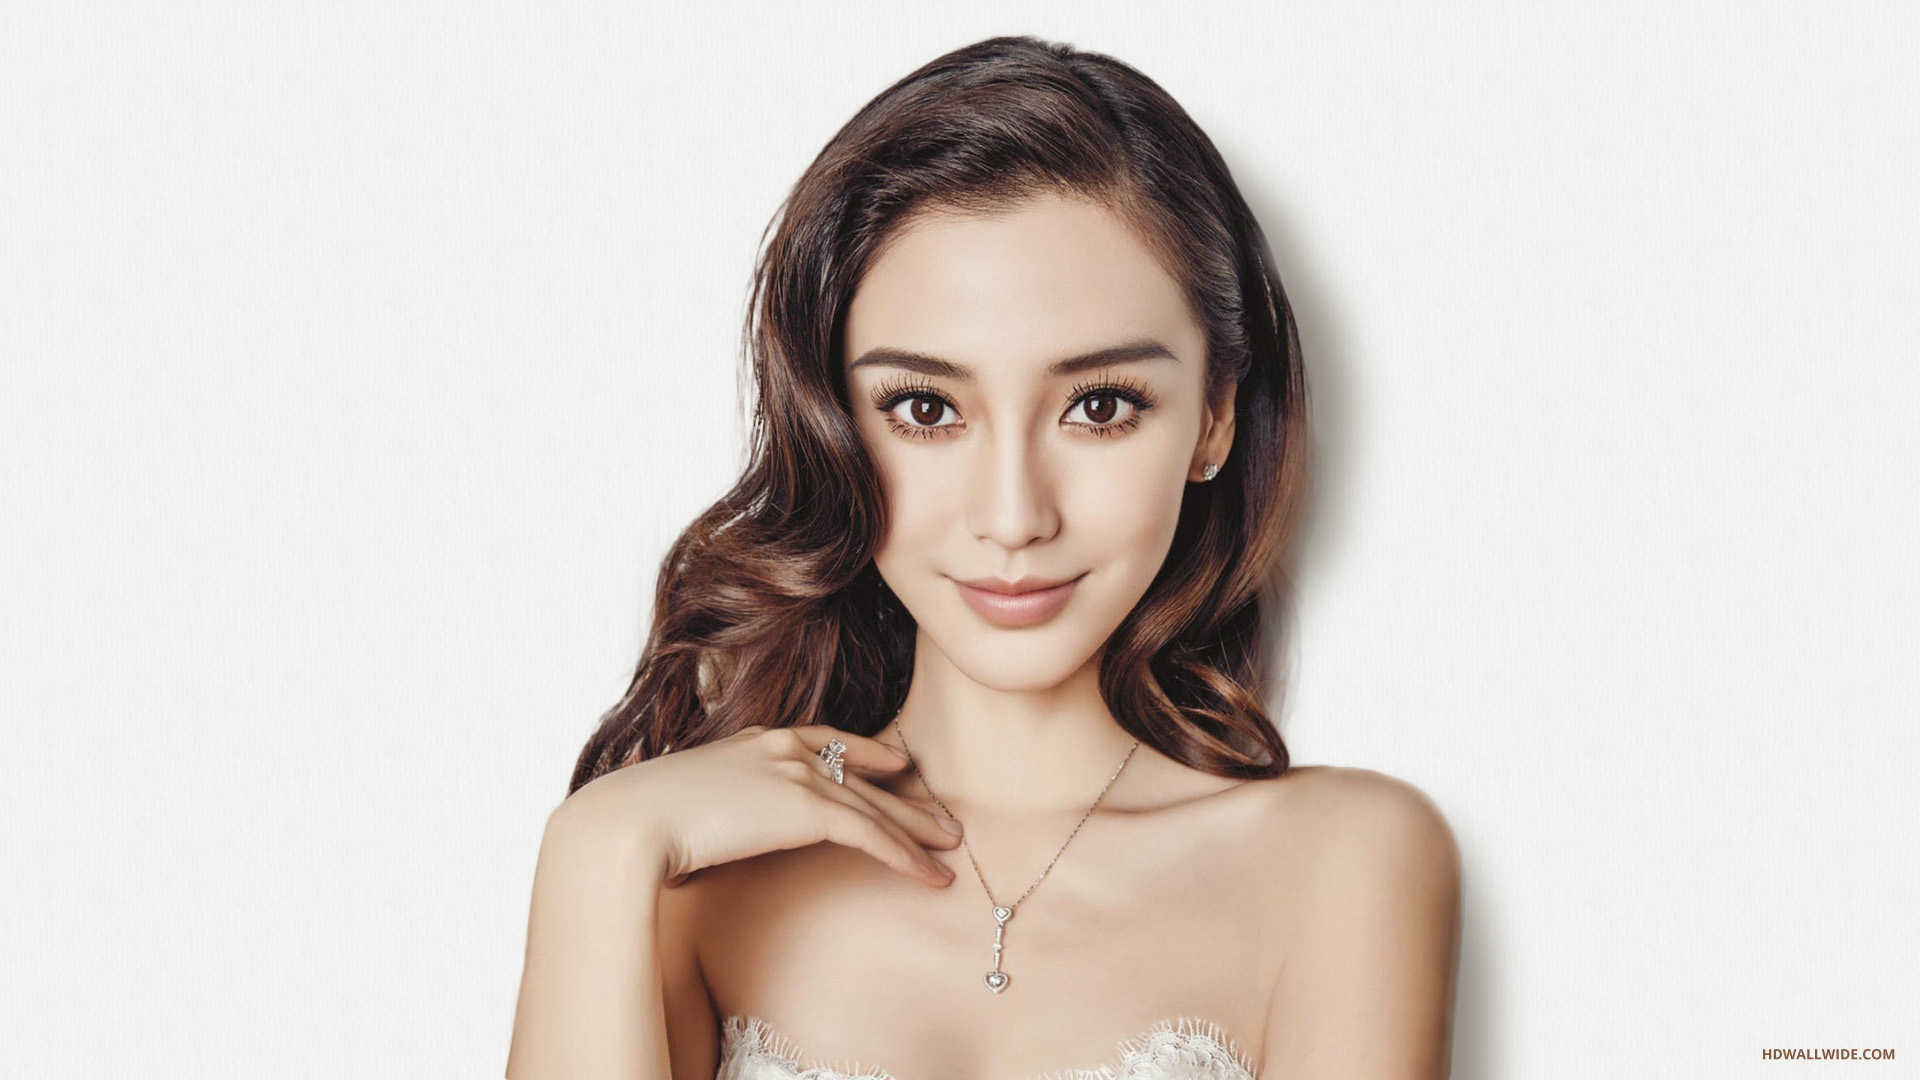 Angelababy Backgrounds, Compatible - PC, Mobile, Gadgets| 1920x1080 px